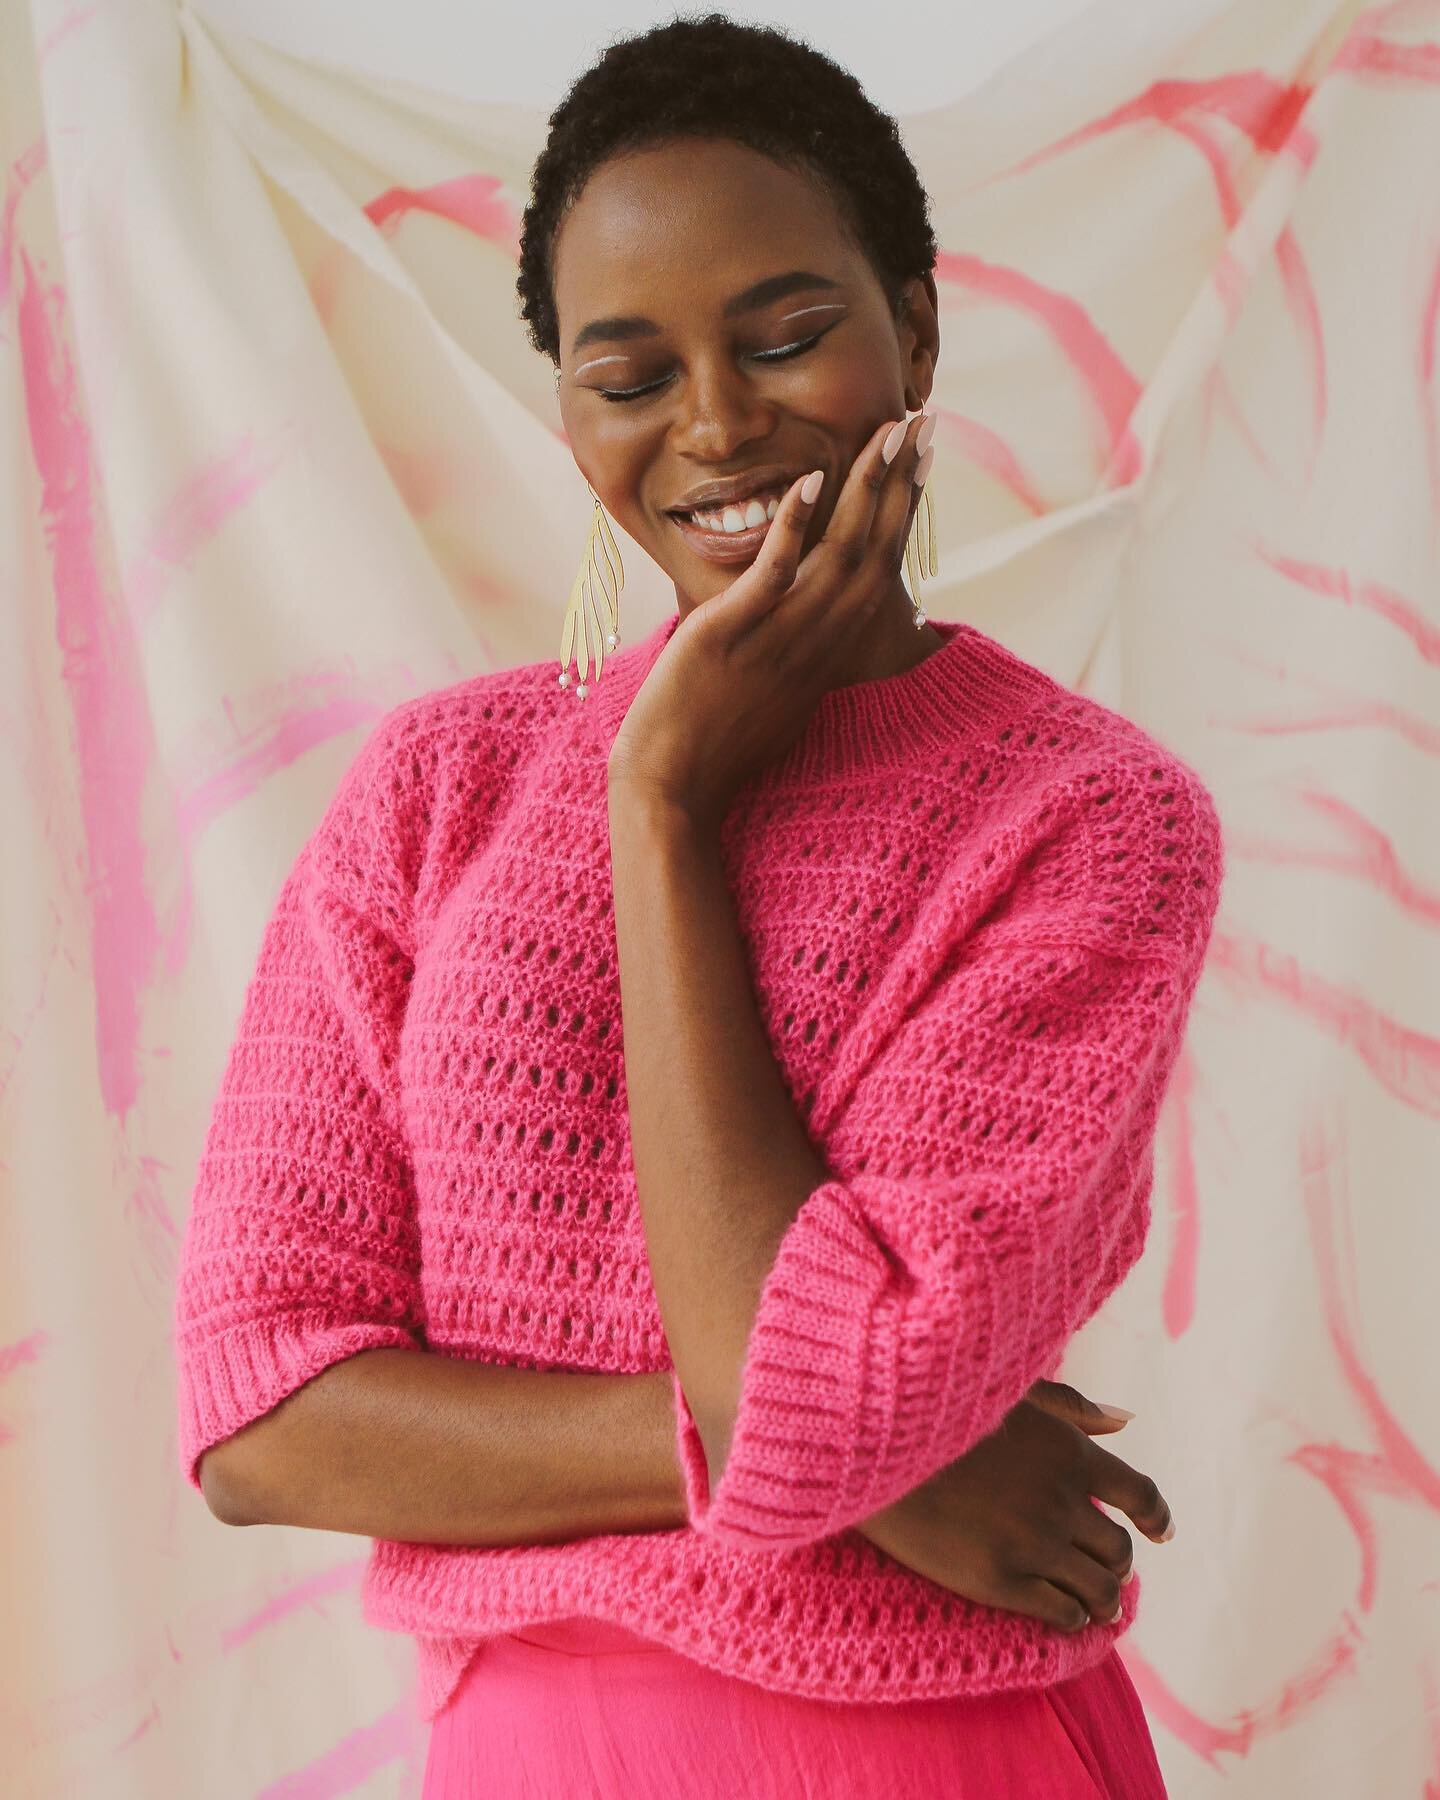 F L O R E S C E N C E .

Inspired by the art of being in bloom. A celebration of growth &amp; the journey of becoming Y O U . Bright, vibrant #southafricanmohair pieces that speak to joyful optimism &amp; seasonless dressing.

The Yarn used, is HOPE 